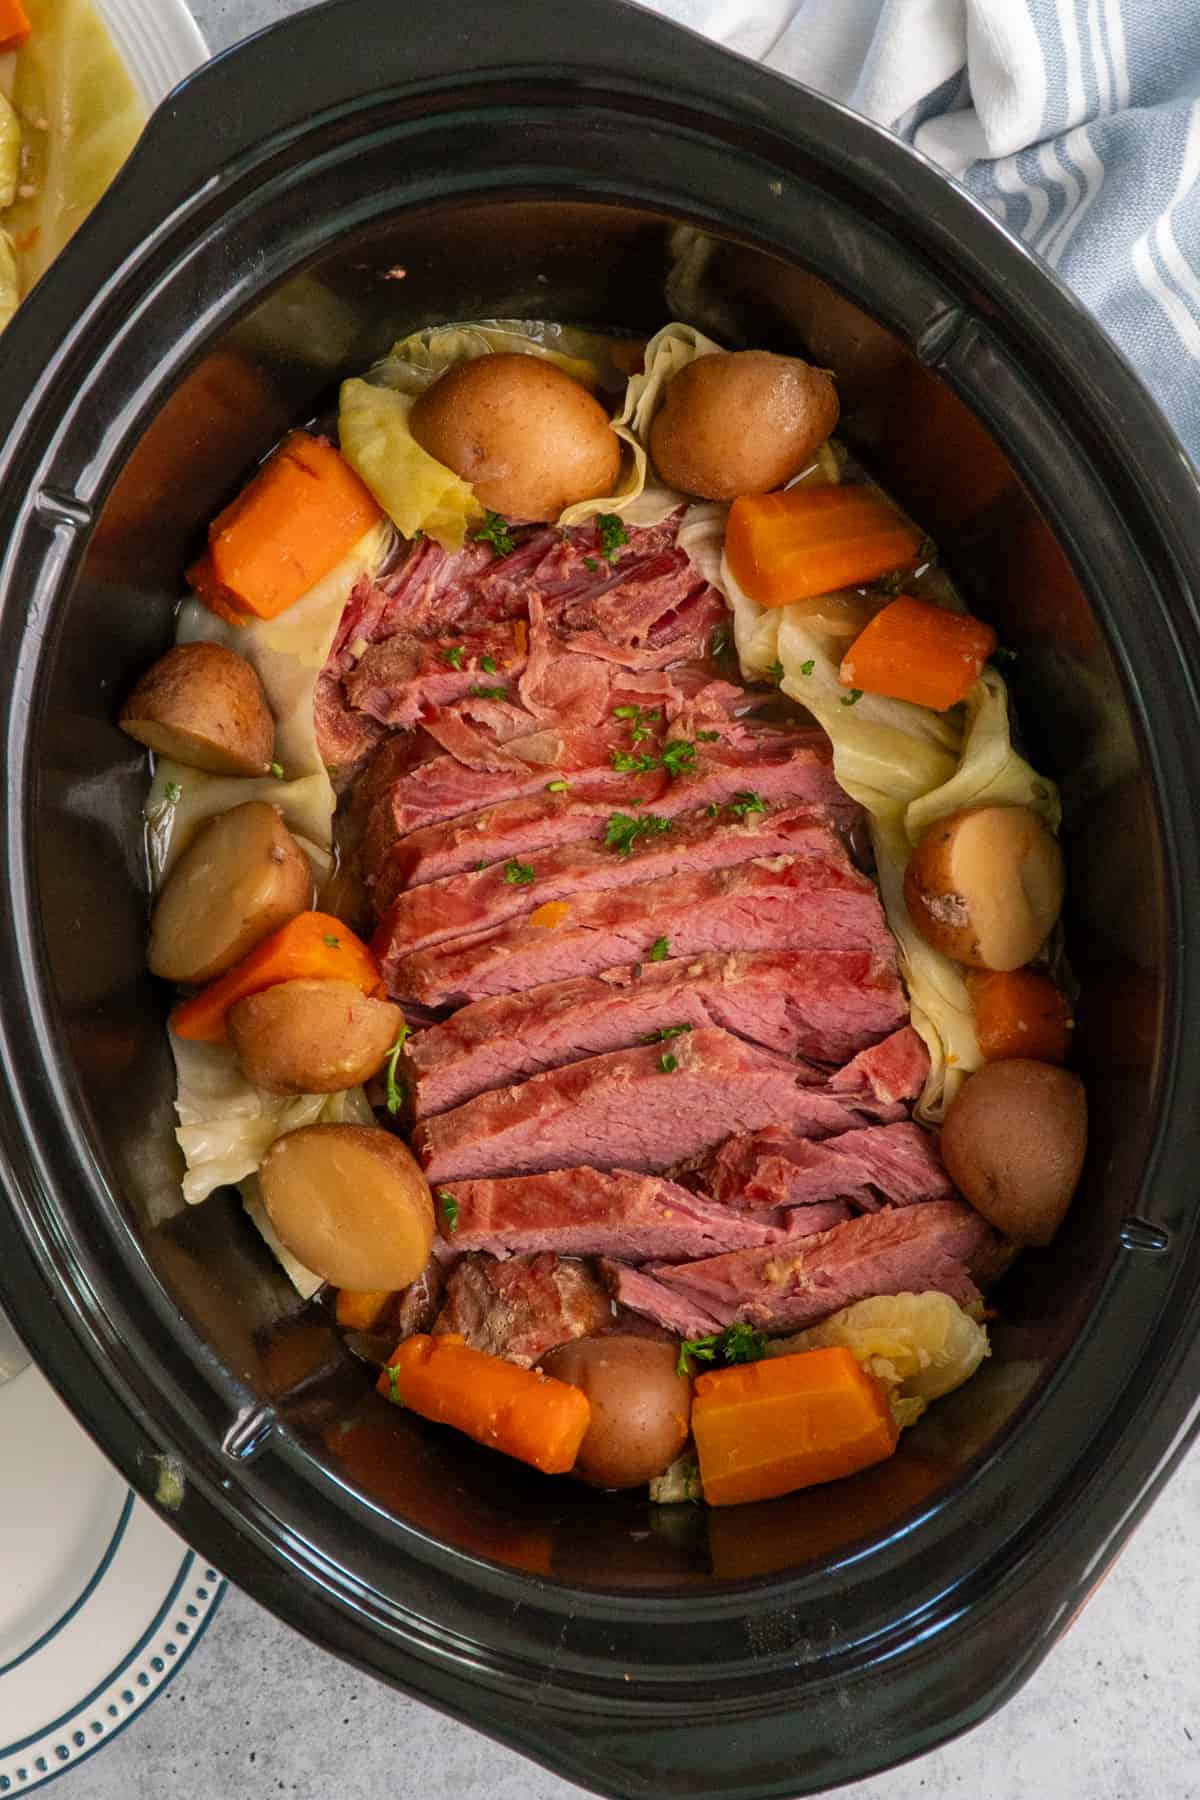 Overhead look at corned beef and cabbage in a slow cooker.